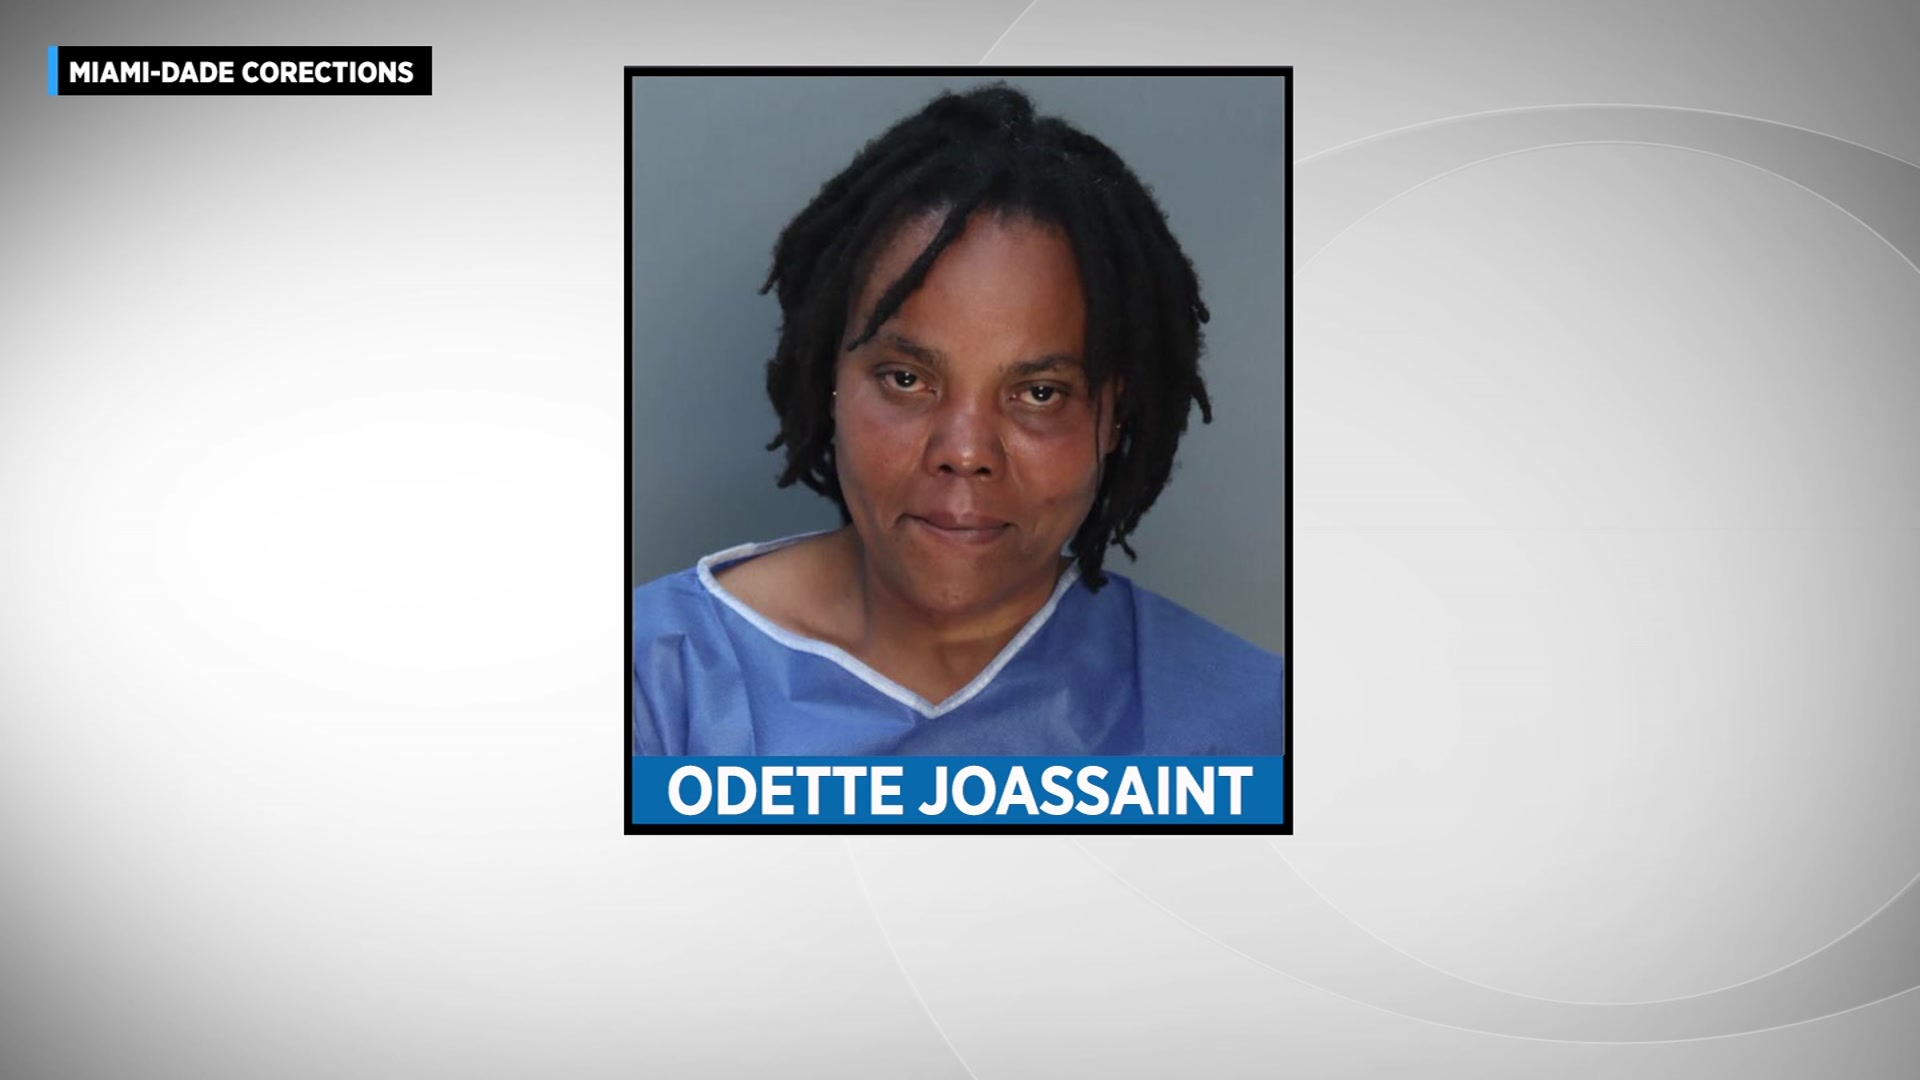 Little Haiti Woman Odette Joassaint, Accused Of Strangling Her Children, May Face Death Penalty